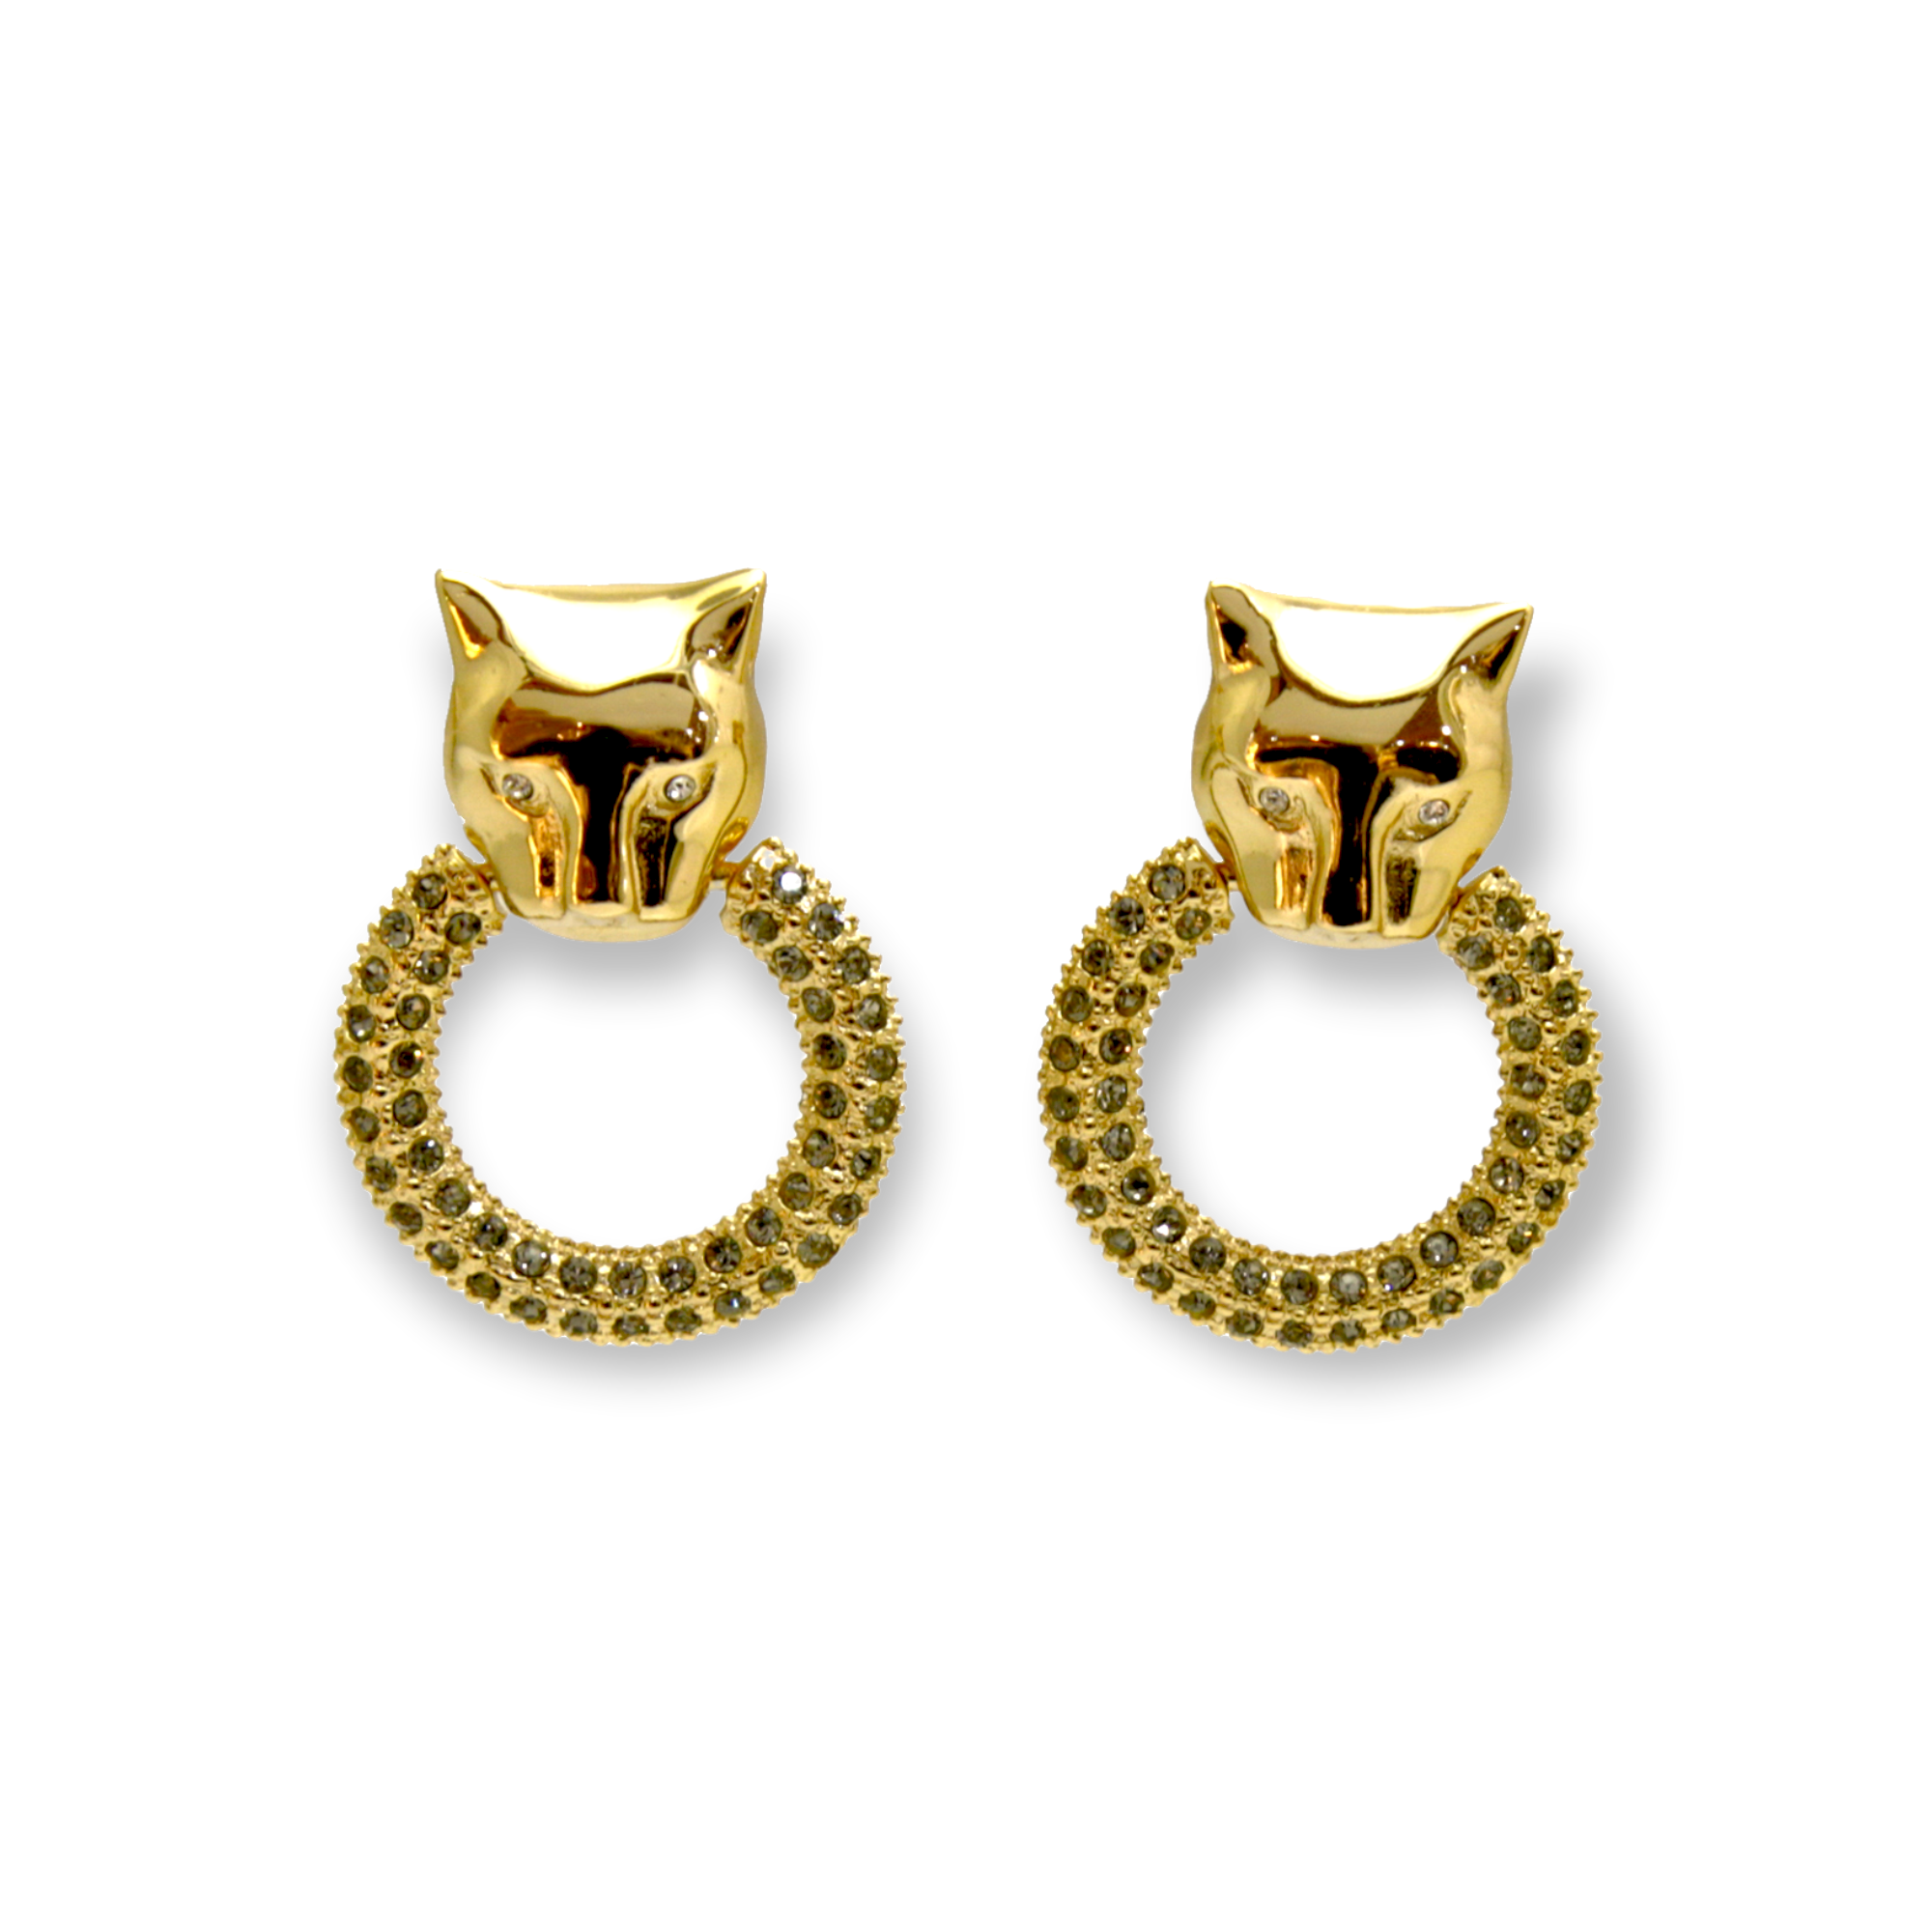 GOLD PANTHER EARRINGS